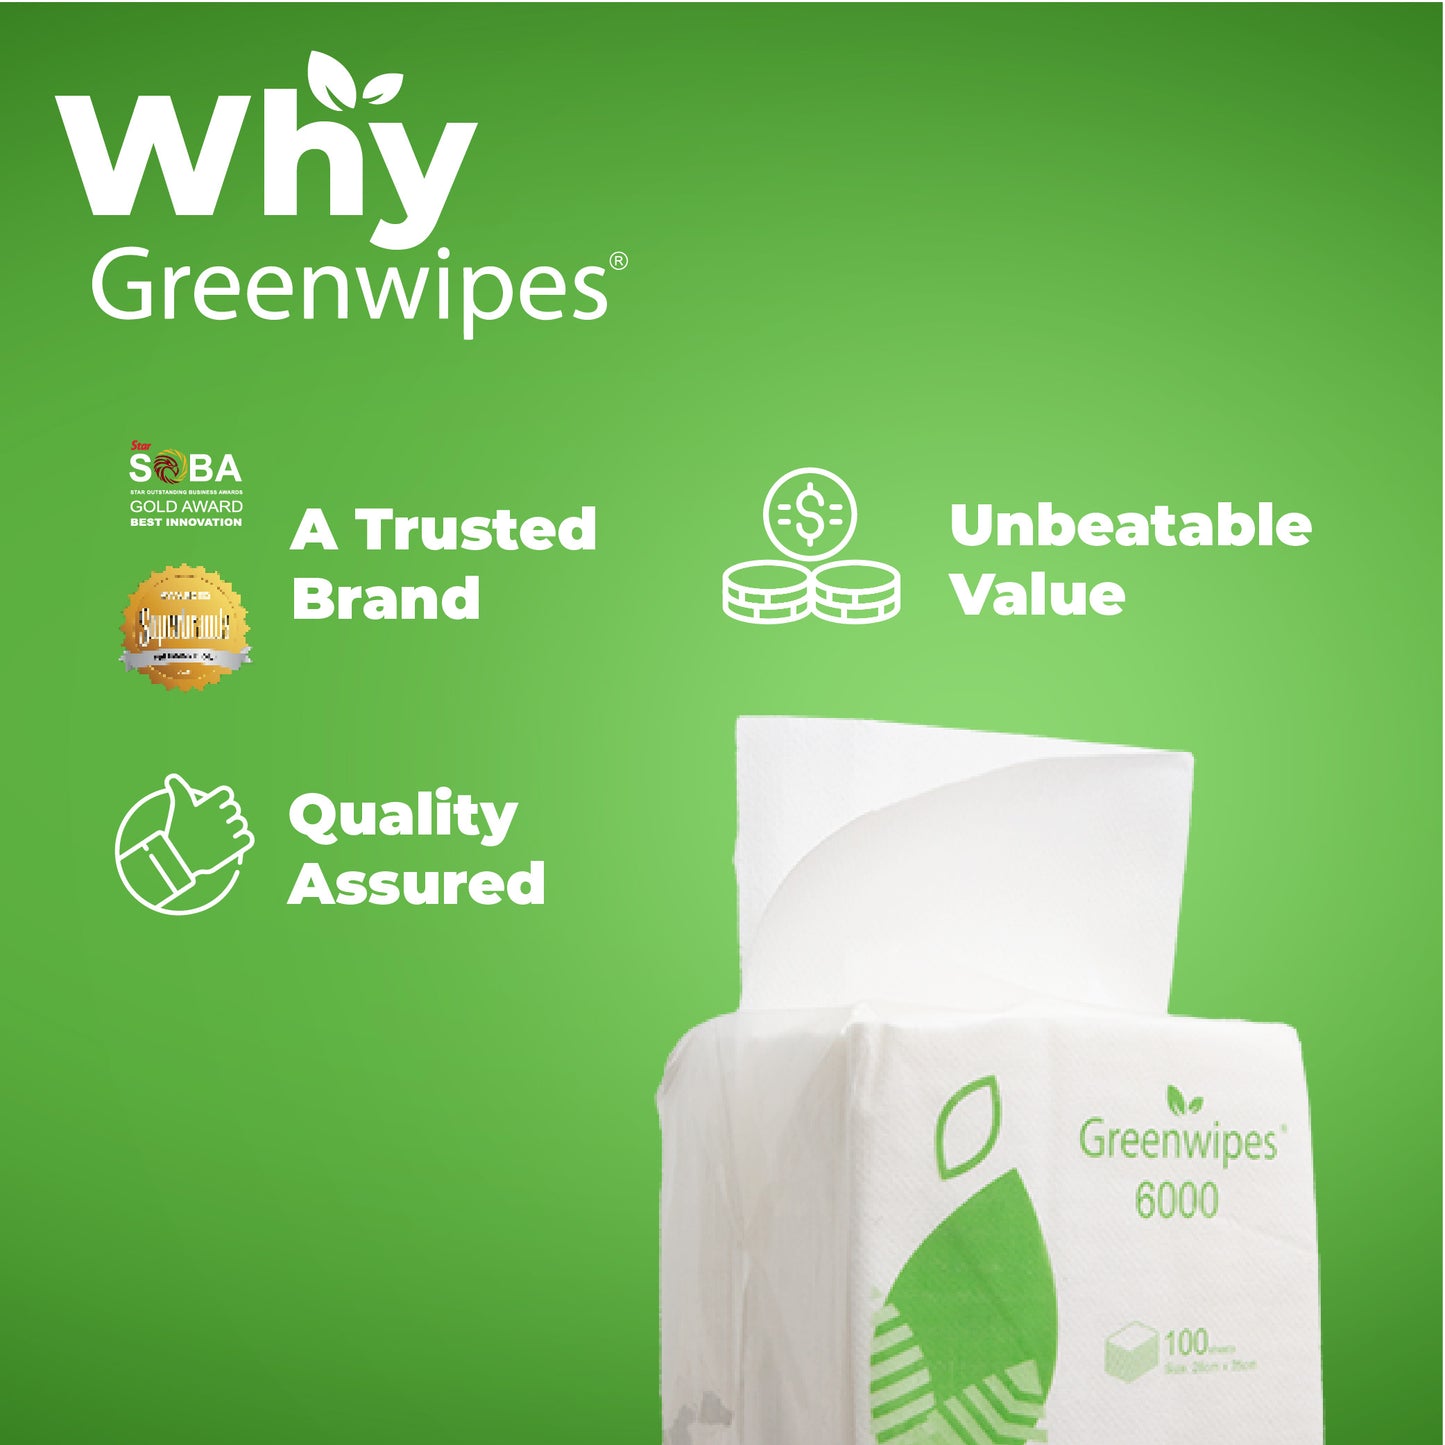 GW-6000 Greenwipes® Light Multi Purpose Cleaning Wipes